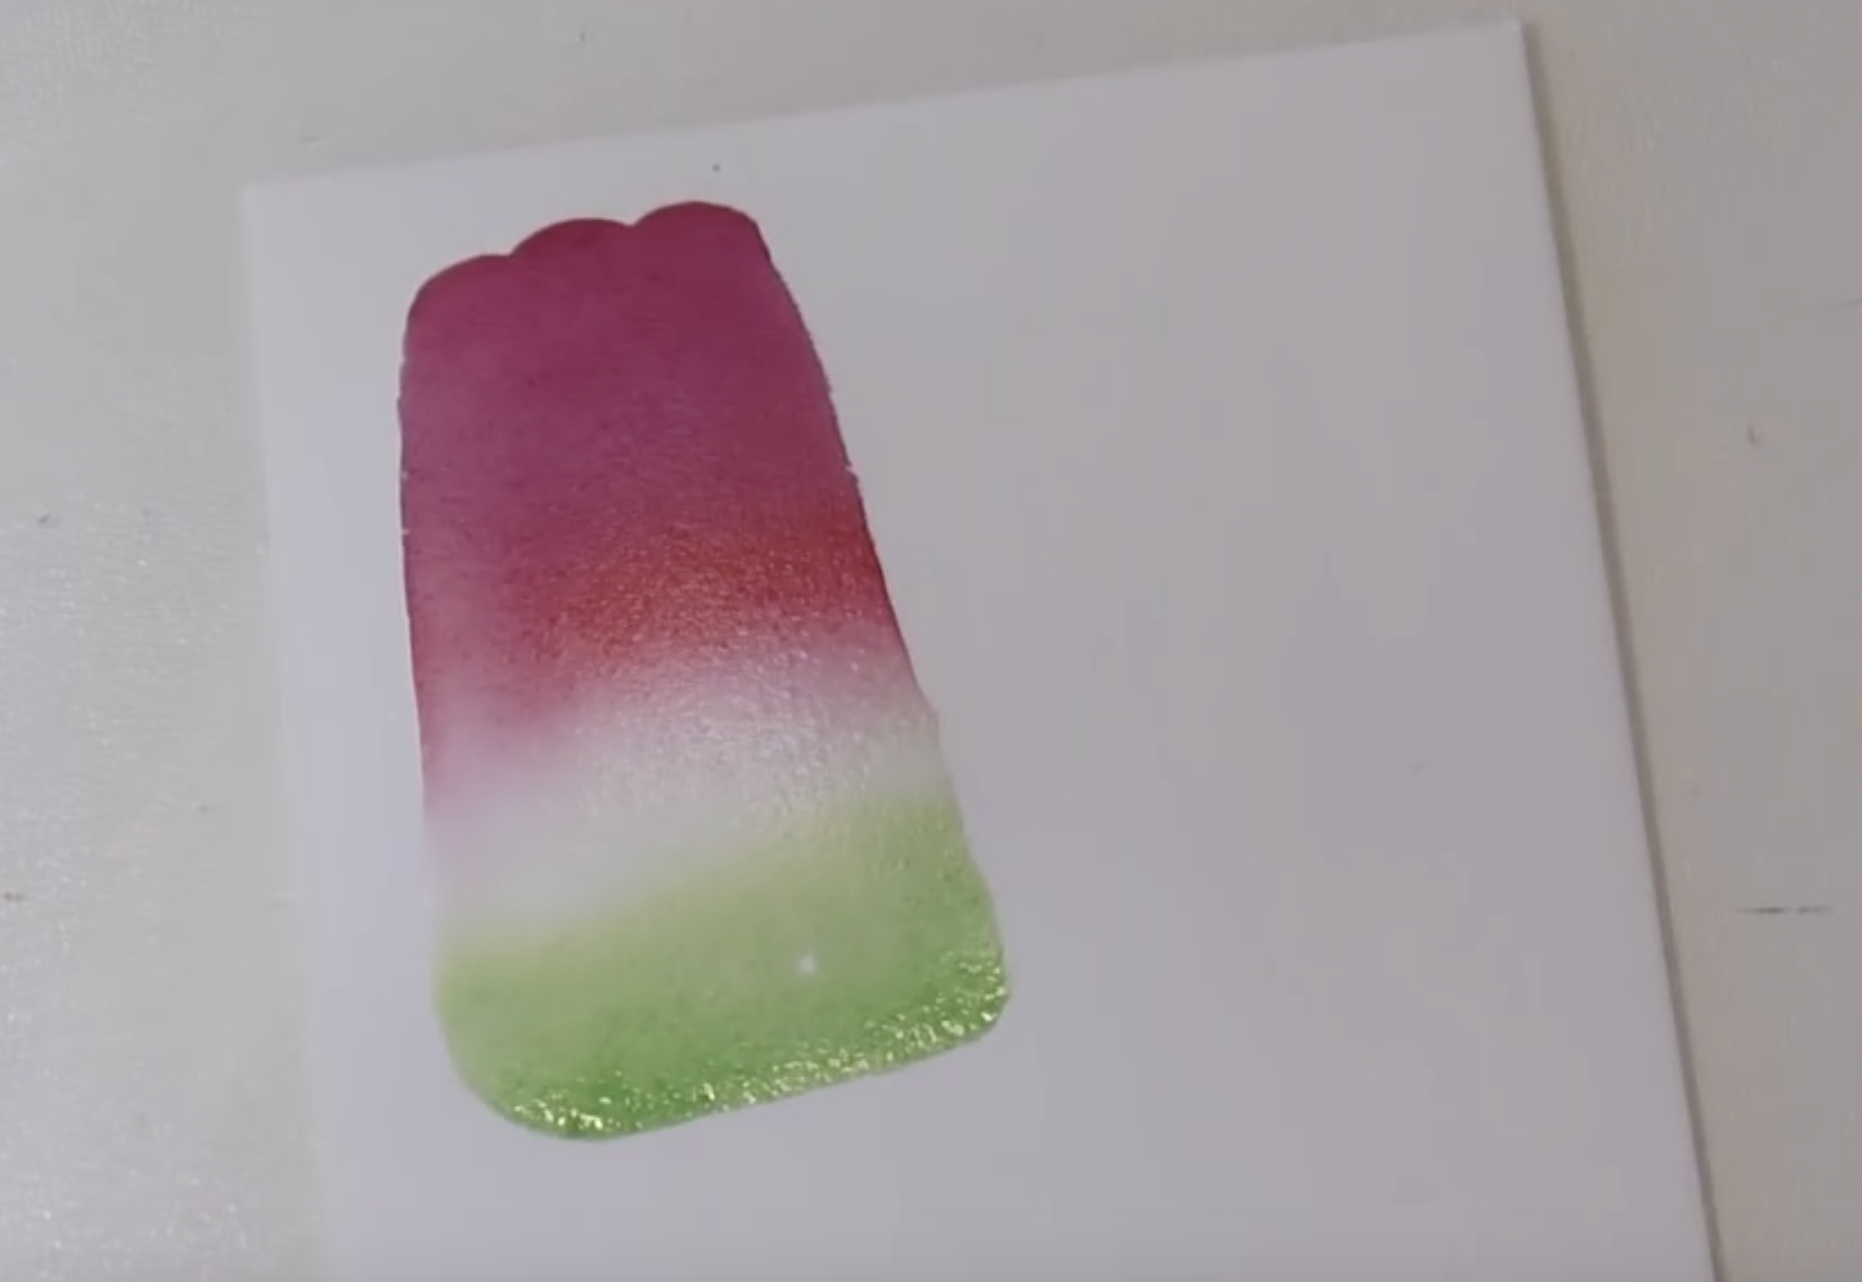 easy-watercolor-ideas-techniques-how-to-paint-a-watercolor-popsicle - Step 3